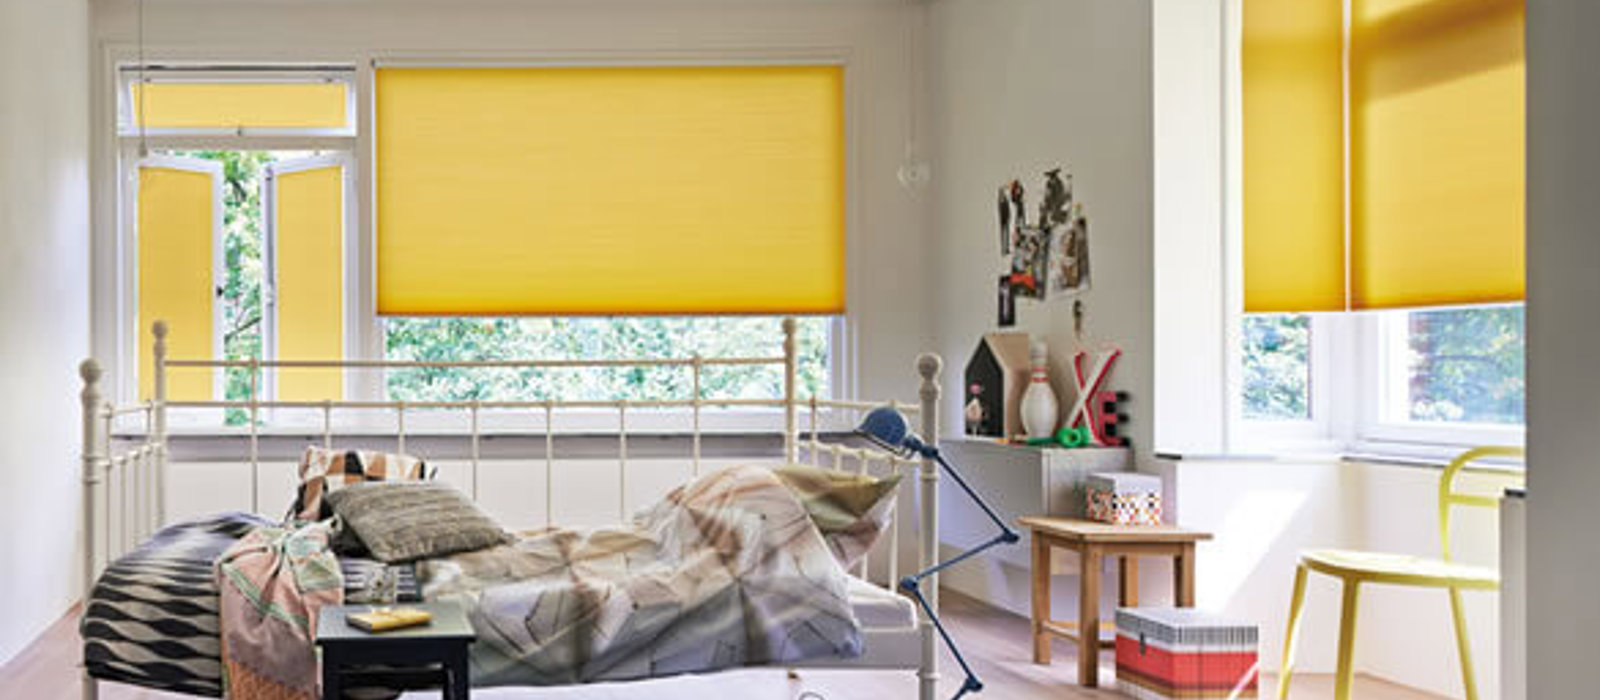 Child's bedroom with yellow Duette energy saving blinds for sustainability